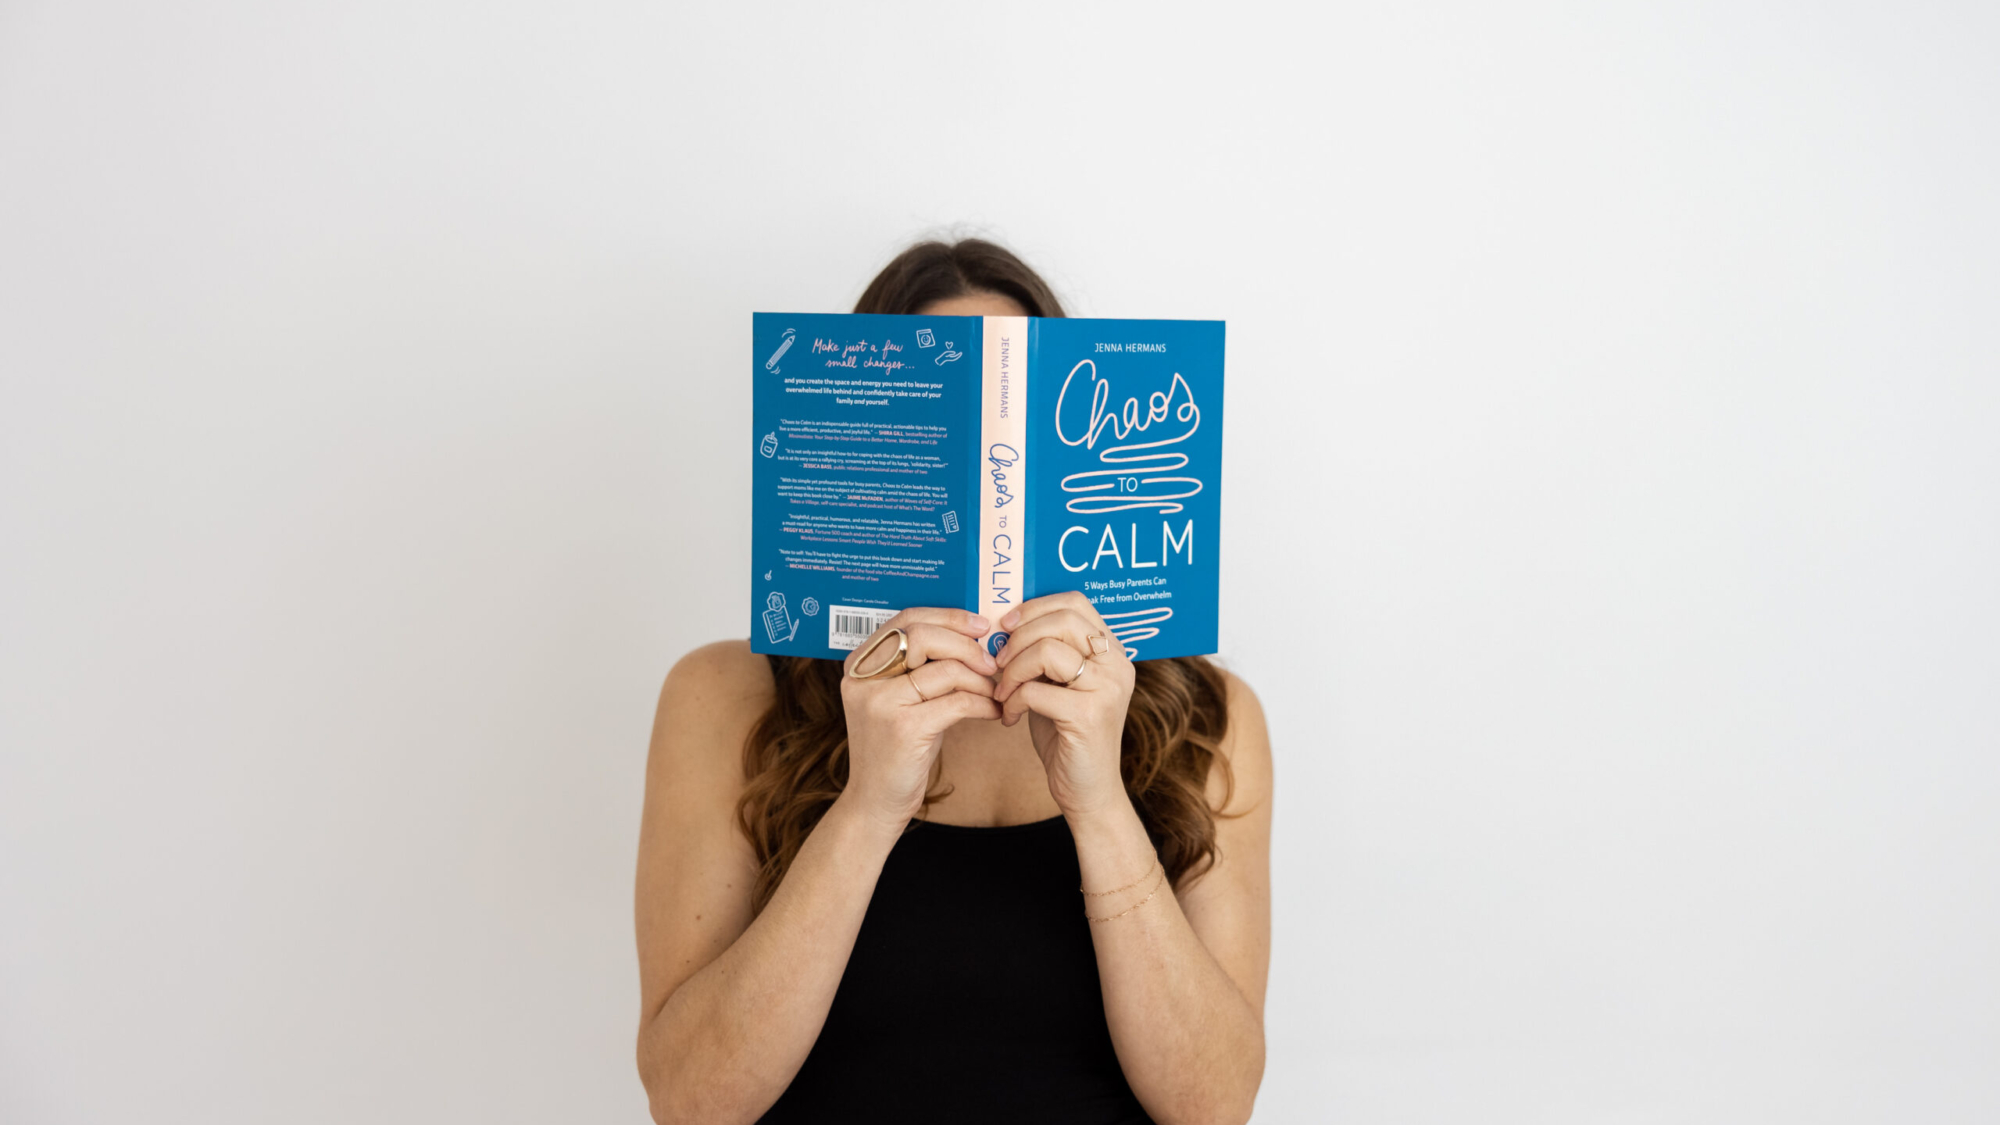 Chaos to Calm blog - Jenna Hermans - Why I Wrote the Book